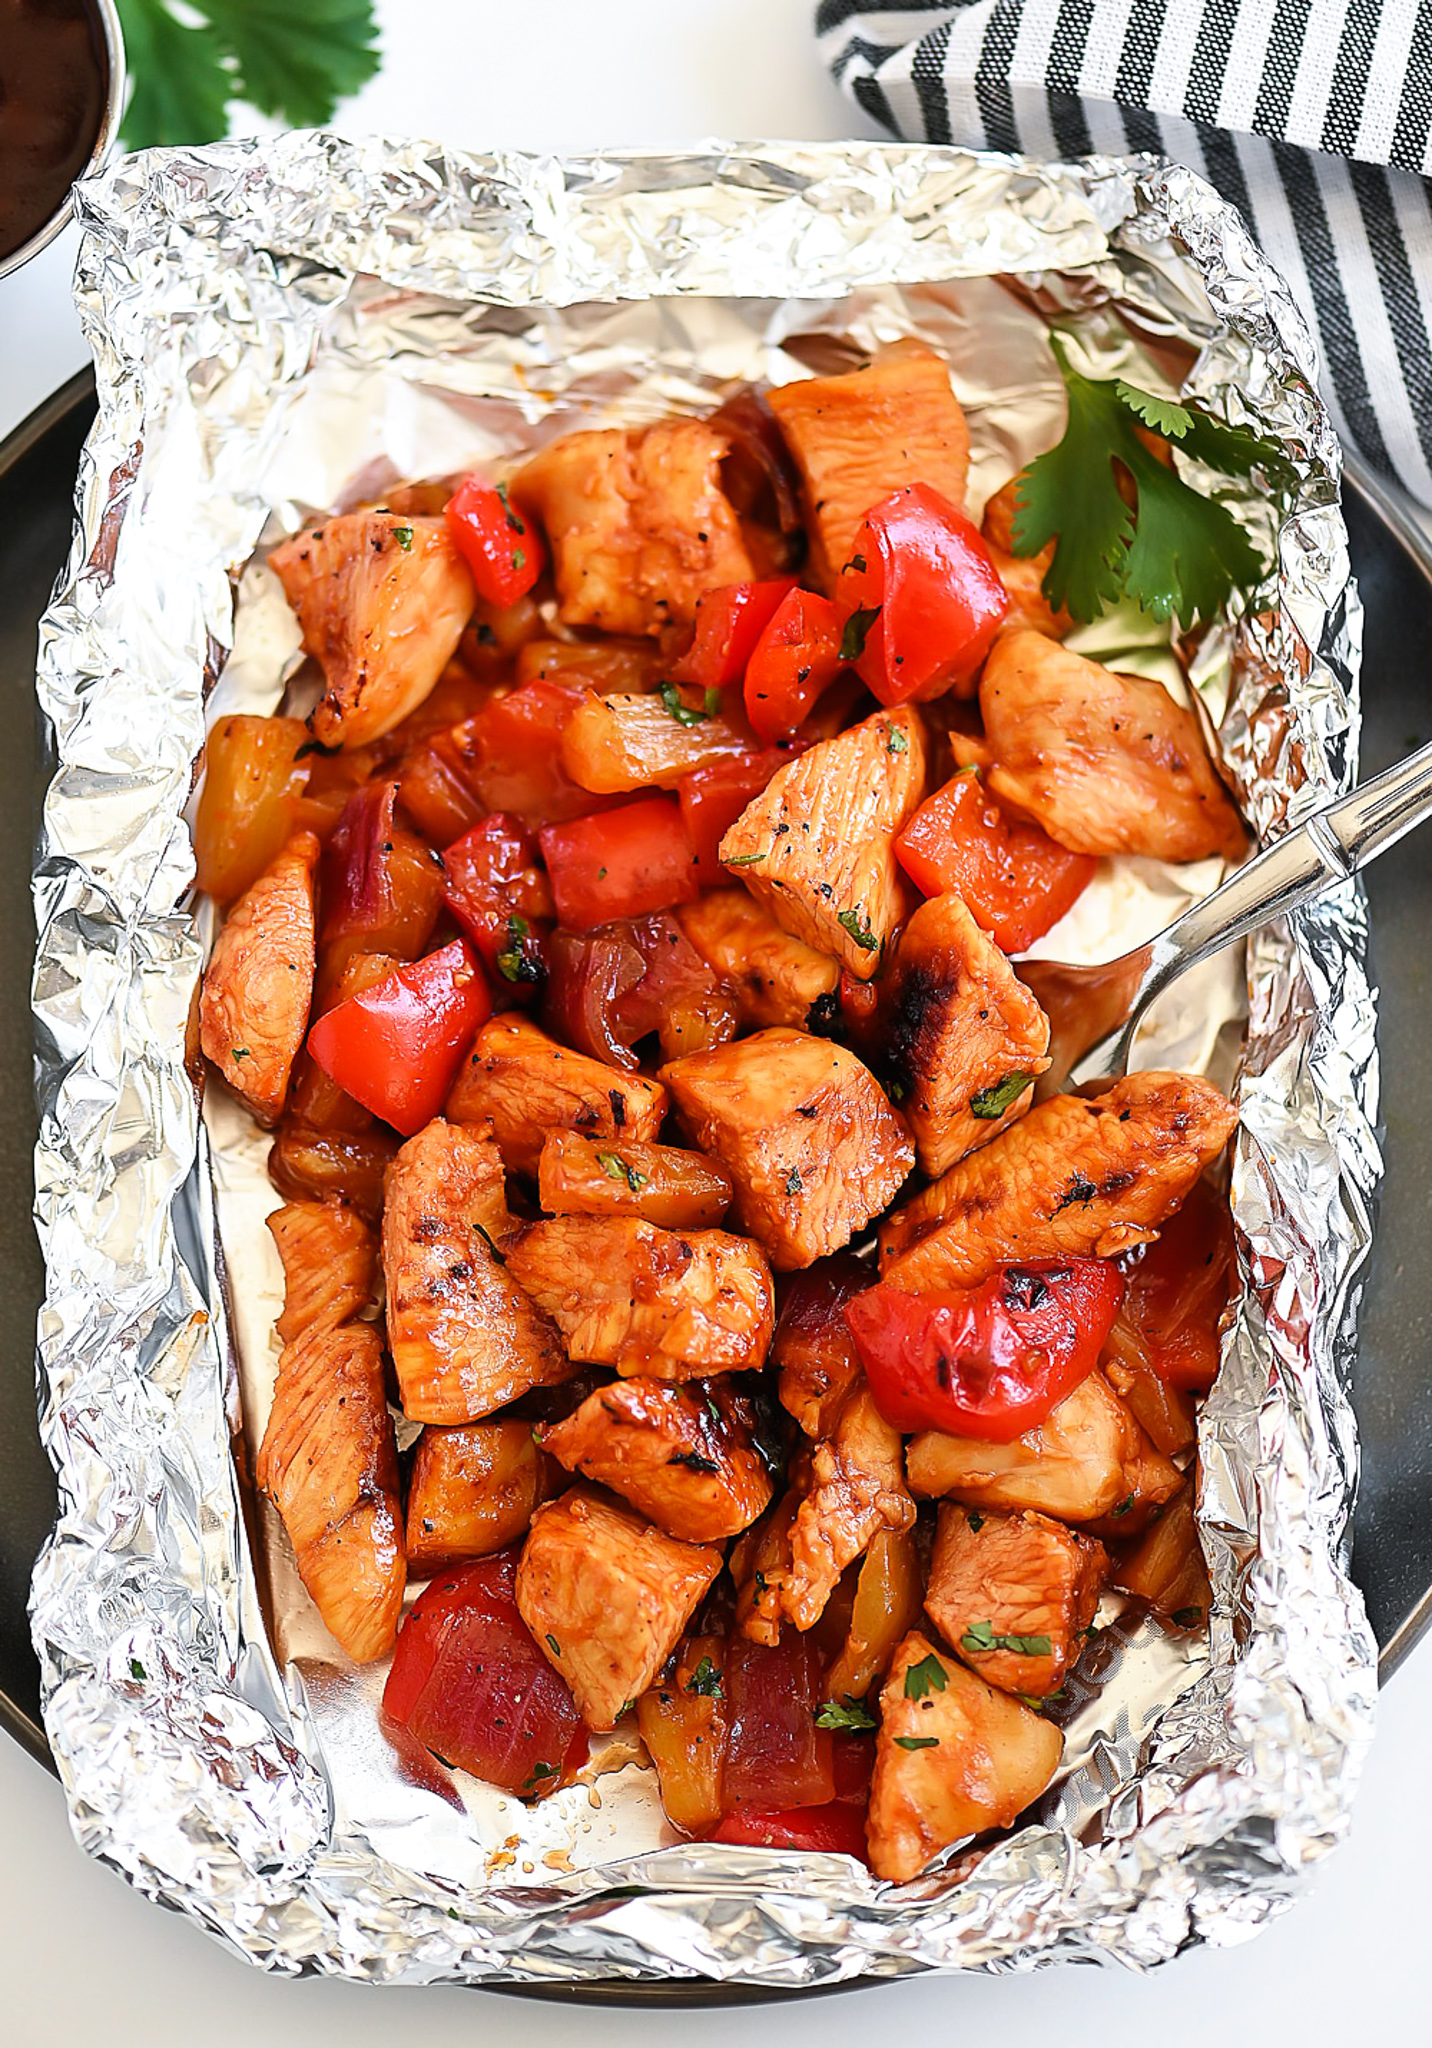 Barbecue Chicken Foil Dinners